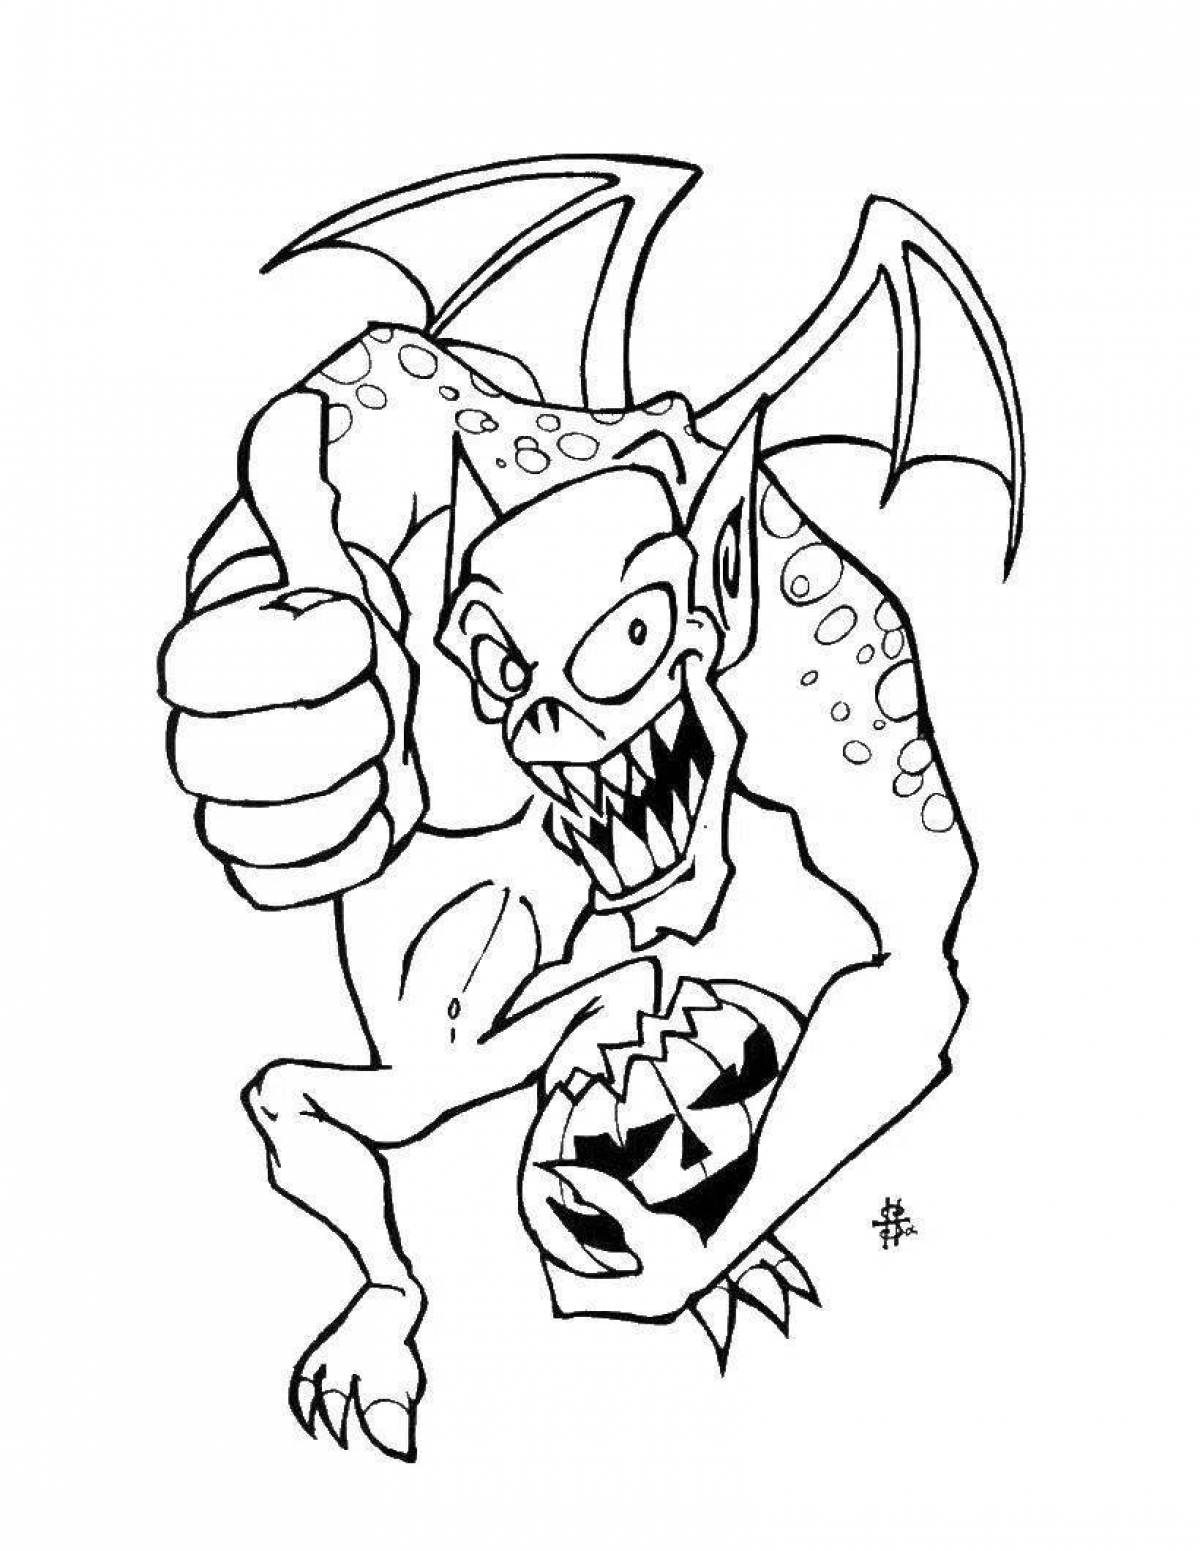 Coloring page beckoning gray monster